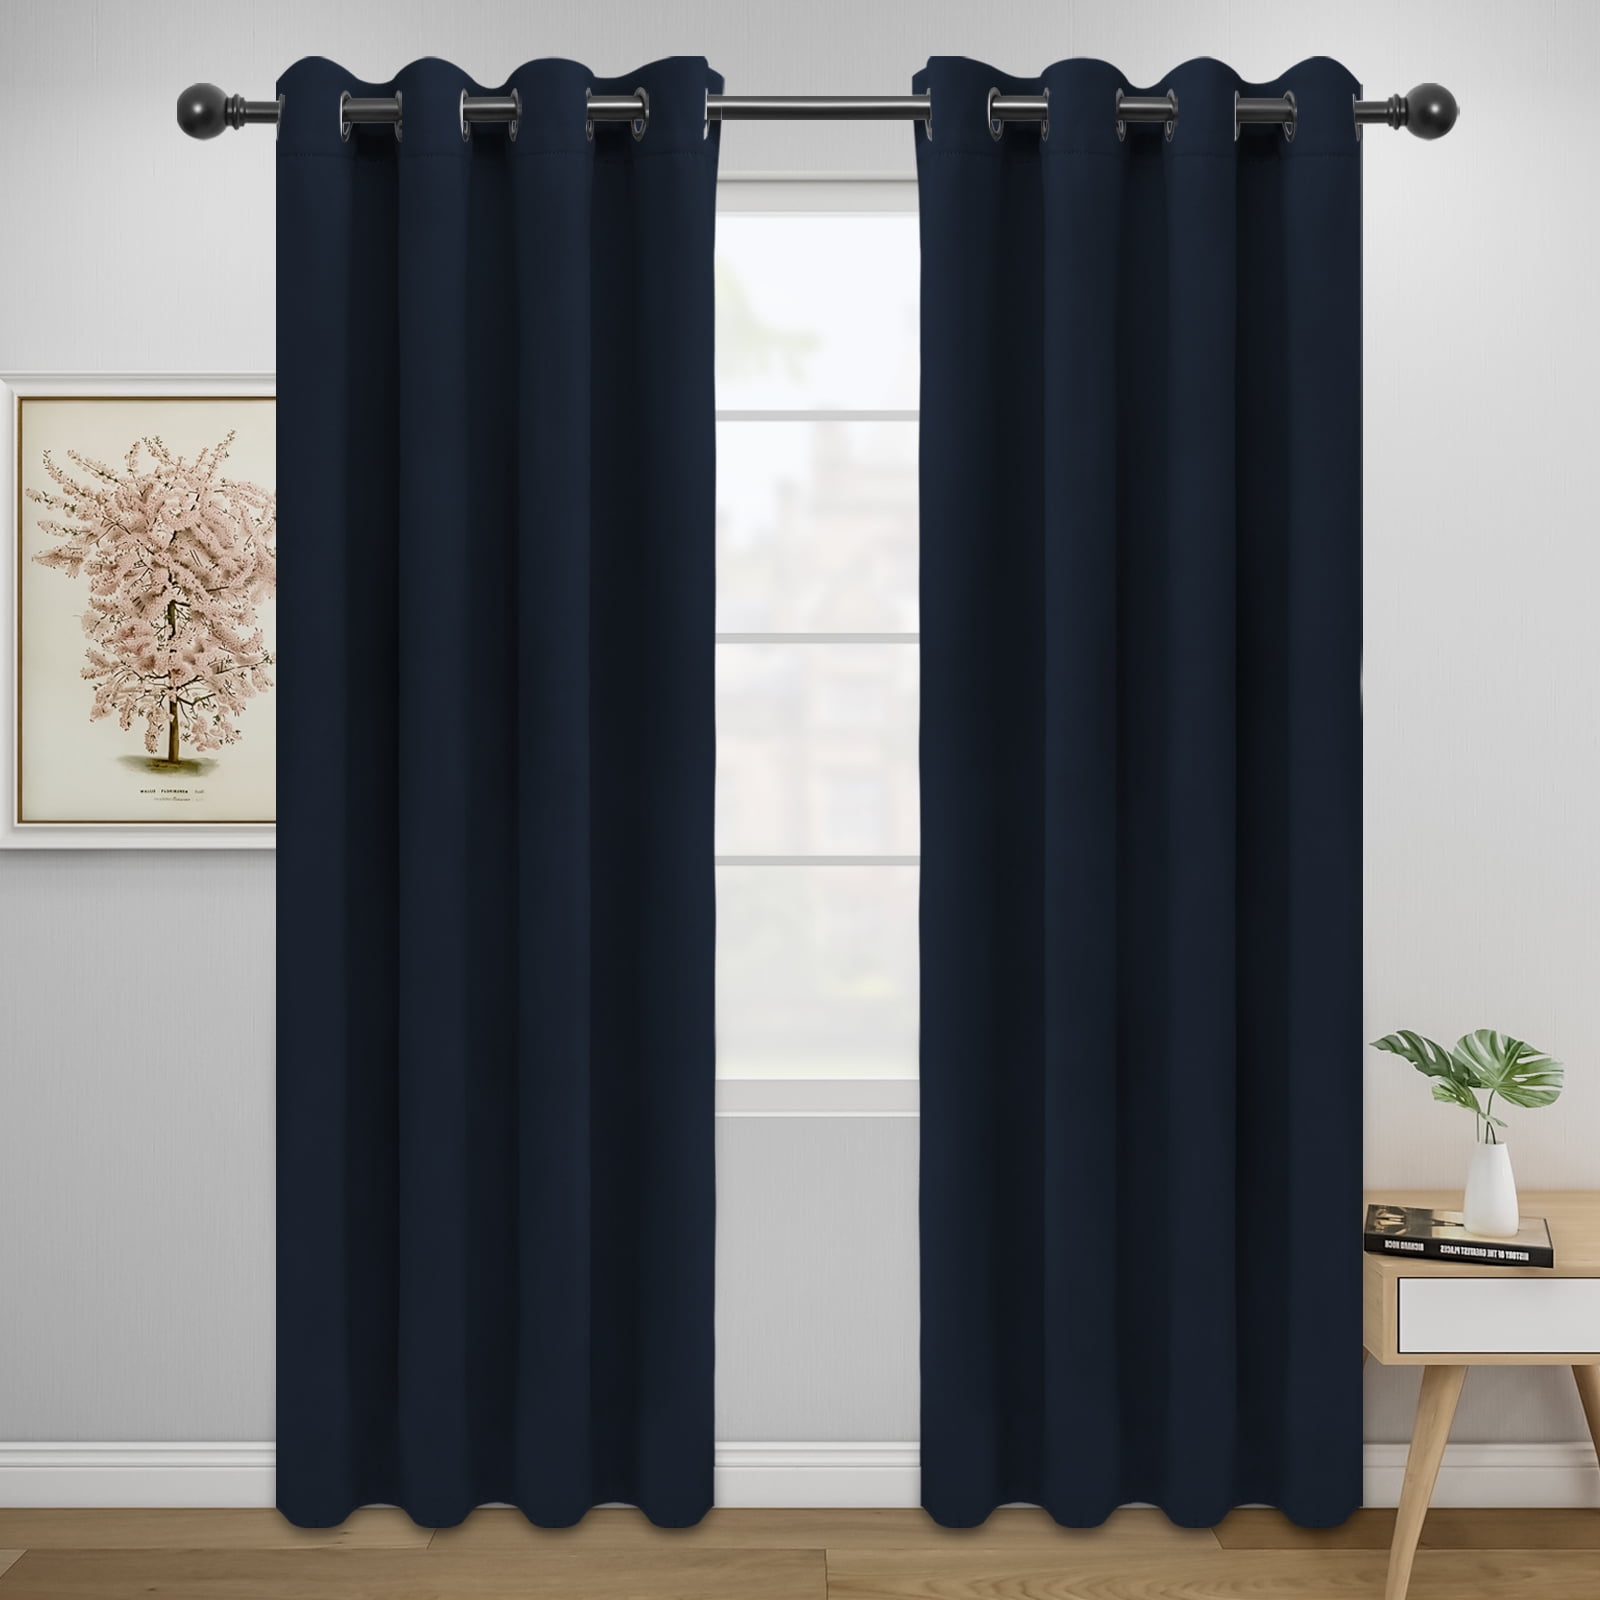 Easy-Going Thermal Insulated Blackout Curtains for Bedroom, Set of 2